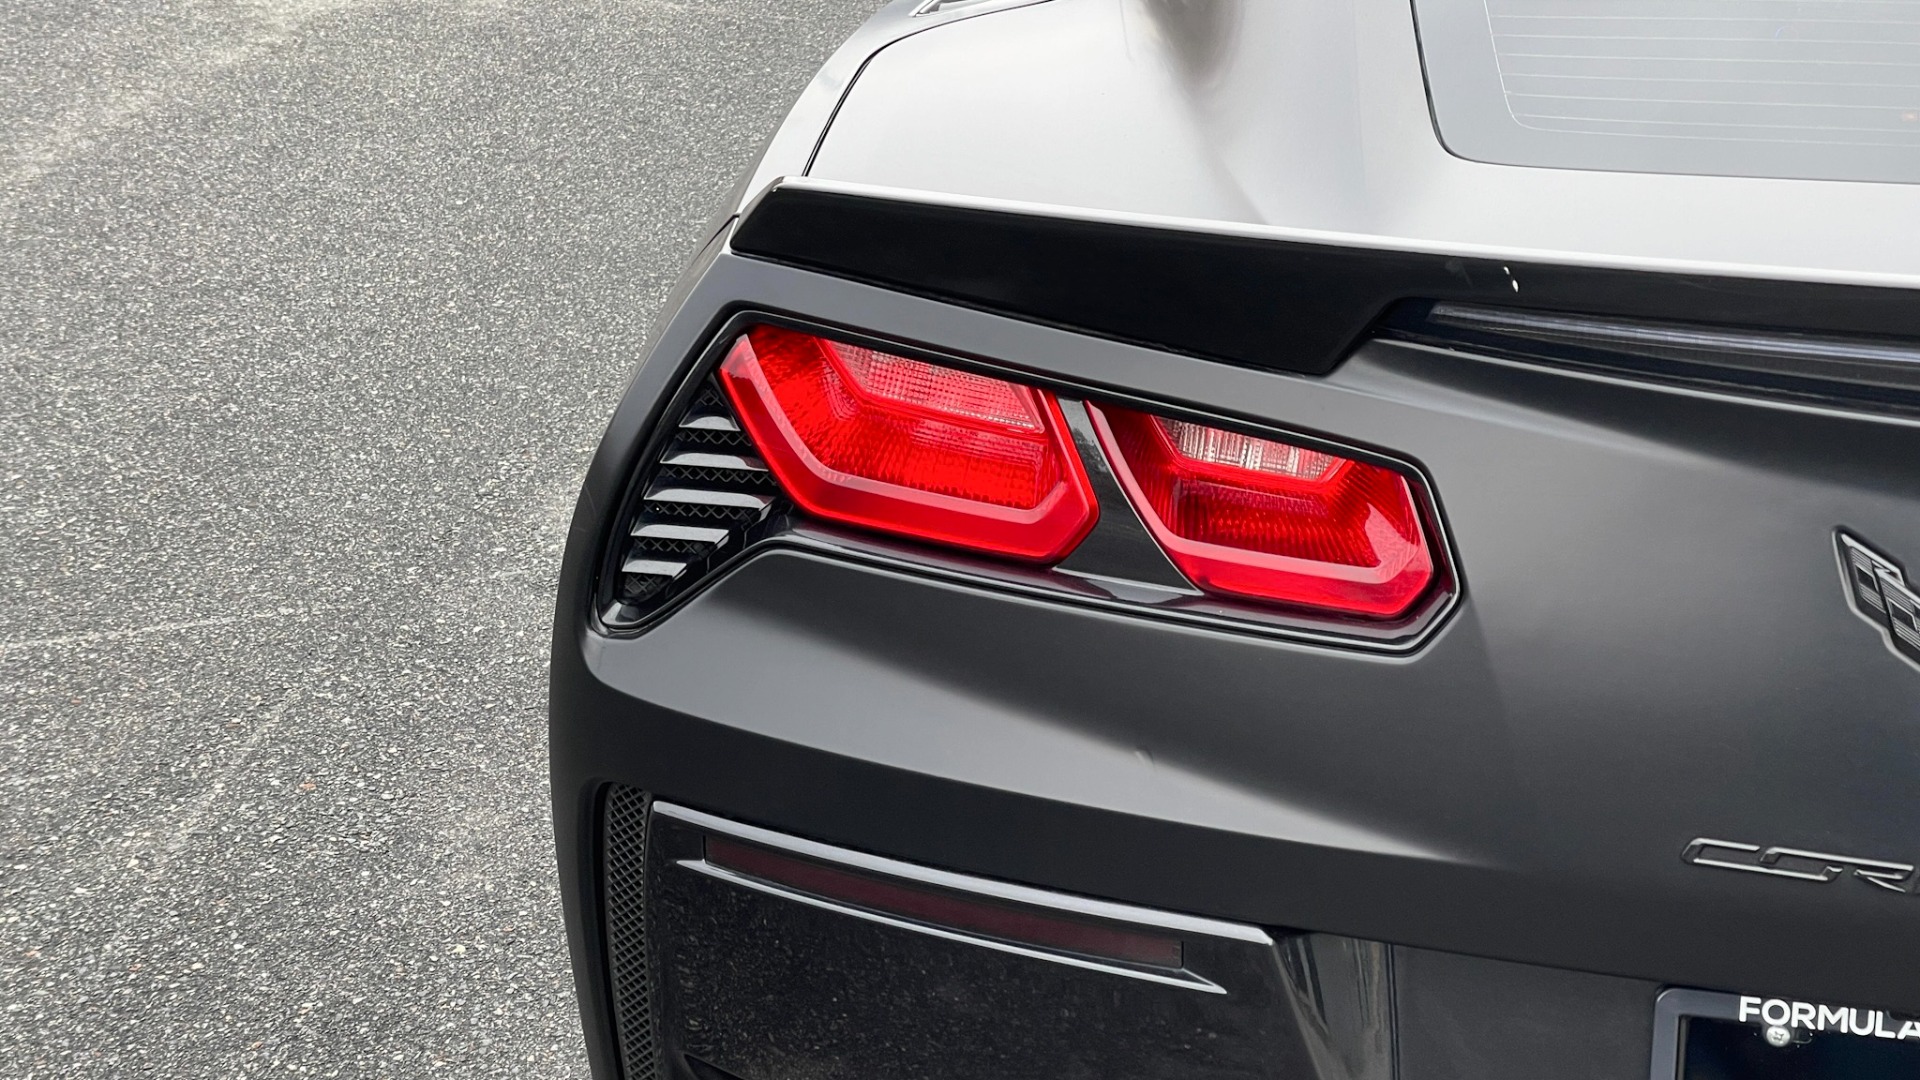 Used 2016 Chevrolet Corvette Z51 2LT / MATTE BLACK / CORSA EXHAUST / COMPETITION SEATS / PERFORMANCE for sale Sold at Formula Imports in Charlotte NC 28227 21